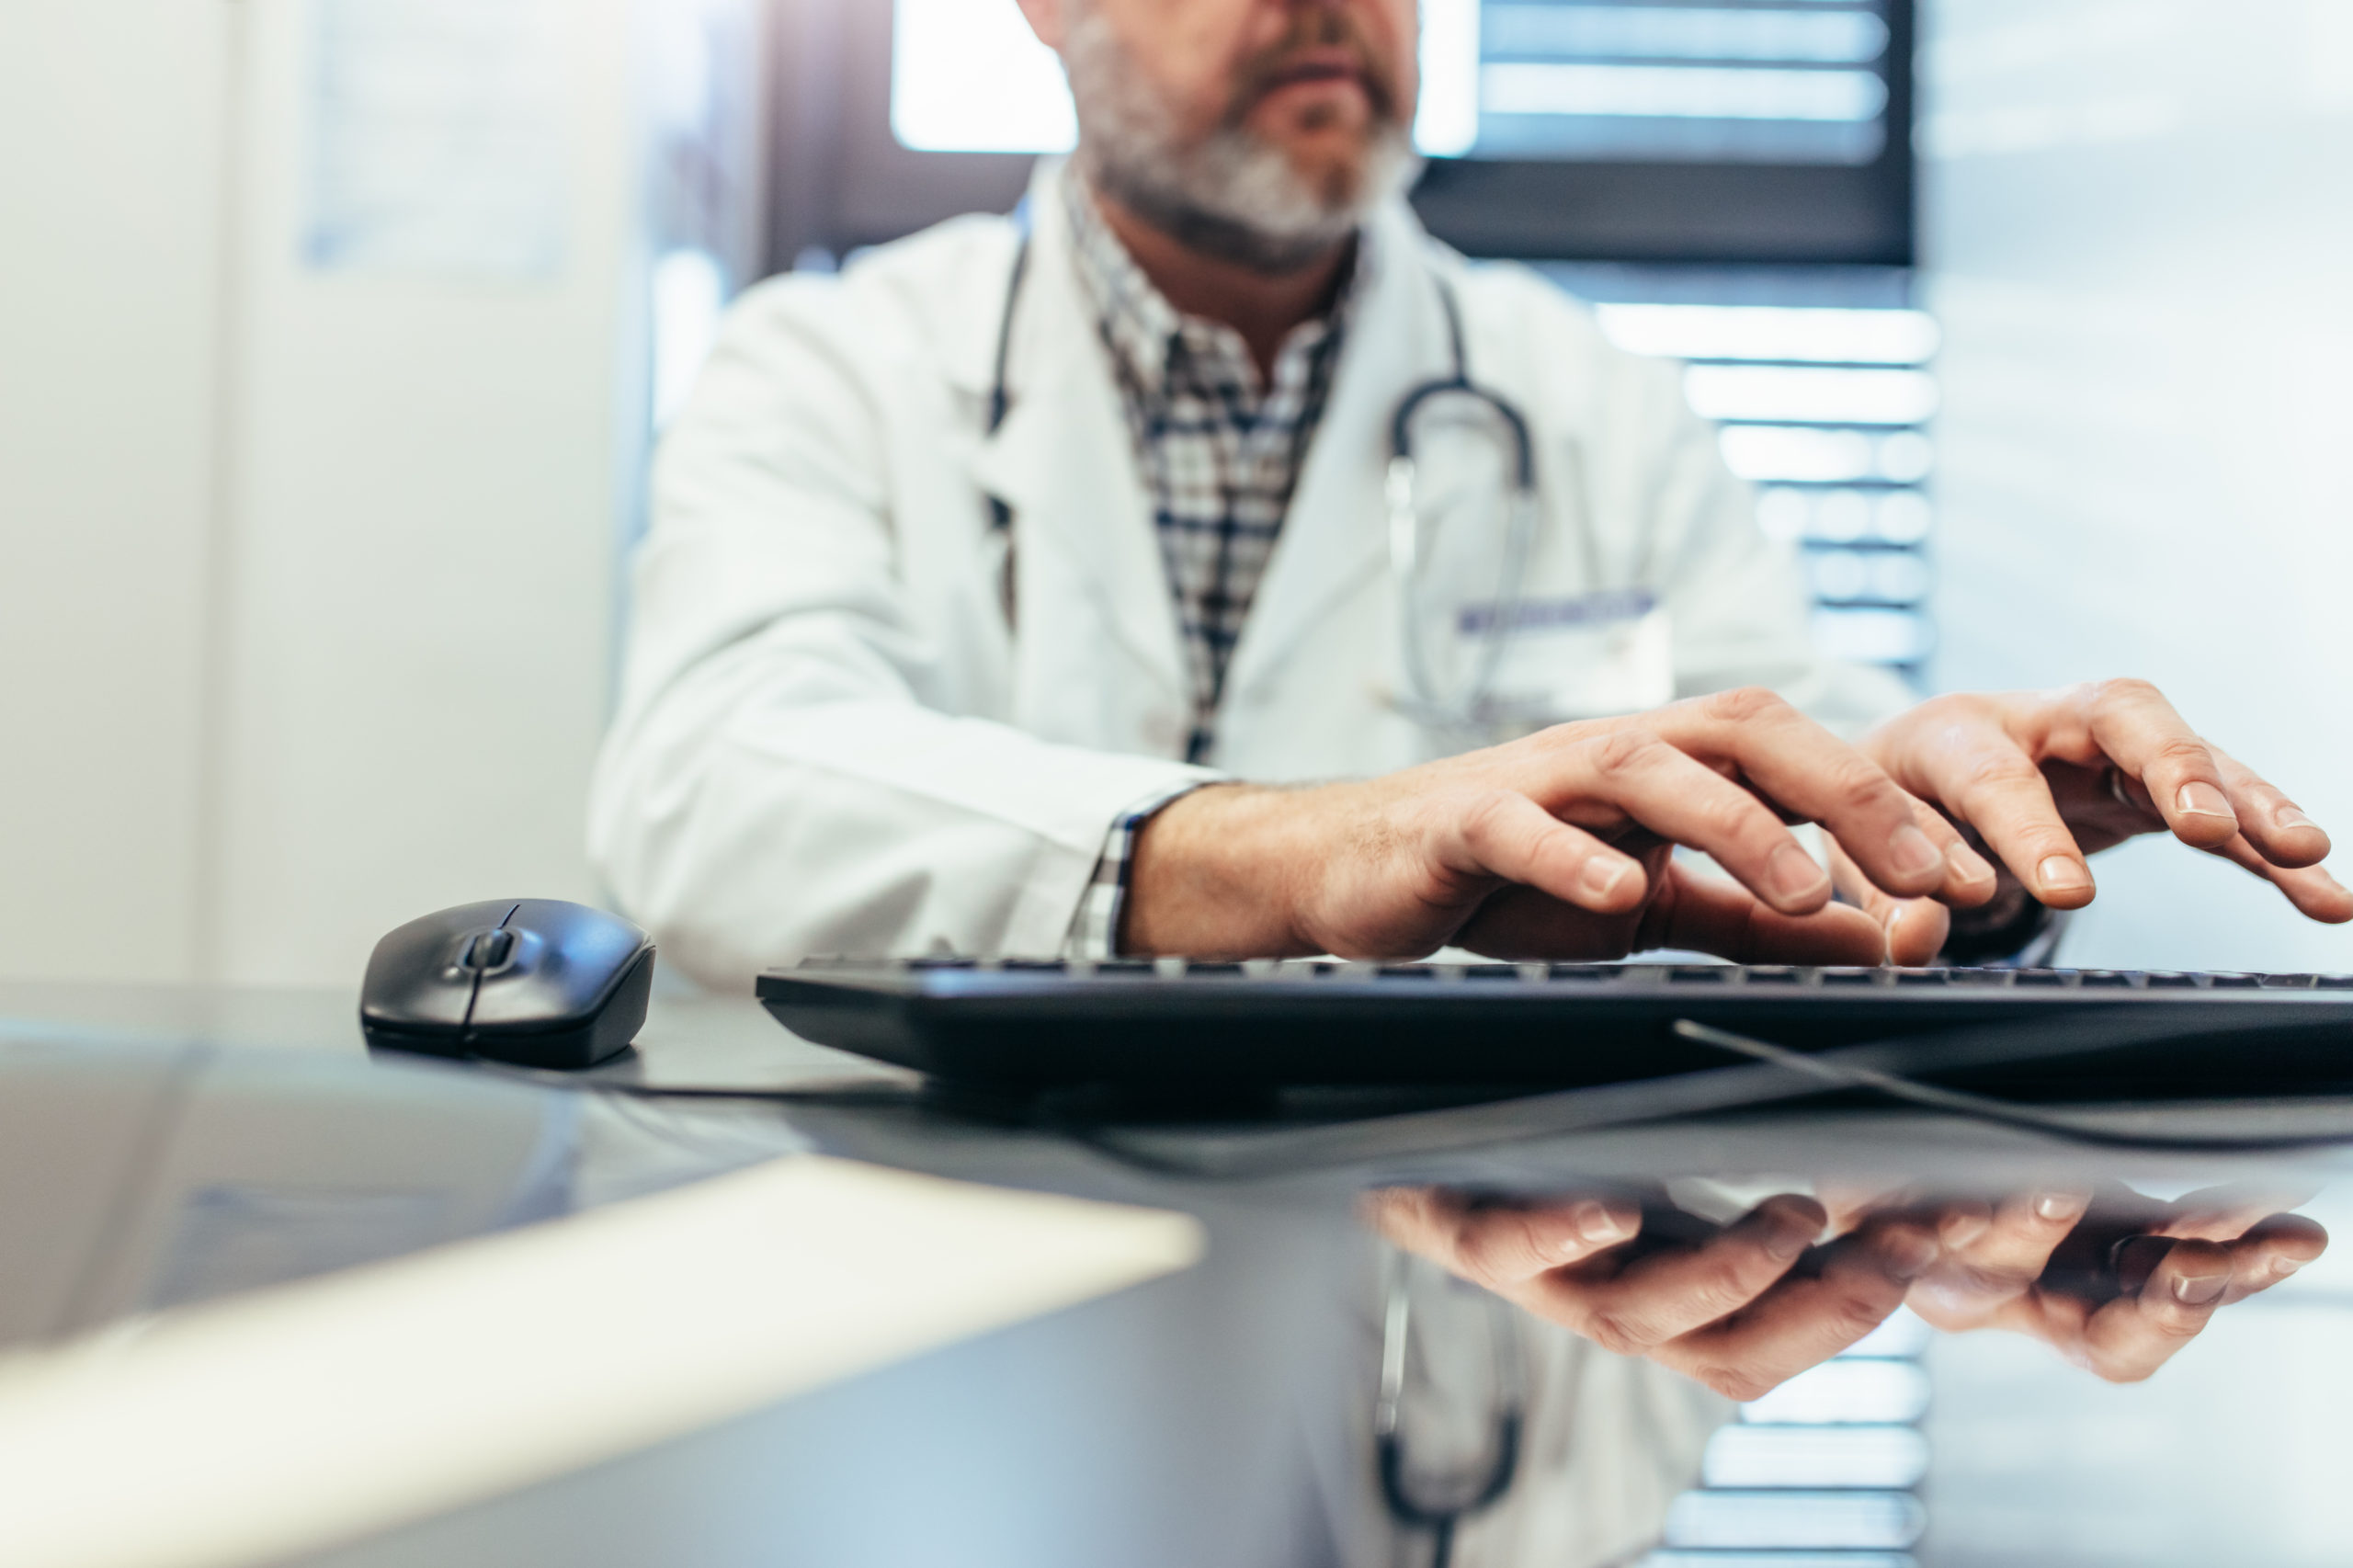 The big healthcare issues that hospital information systems can help solve